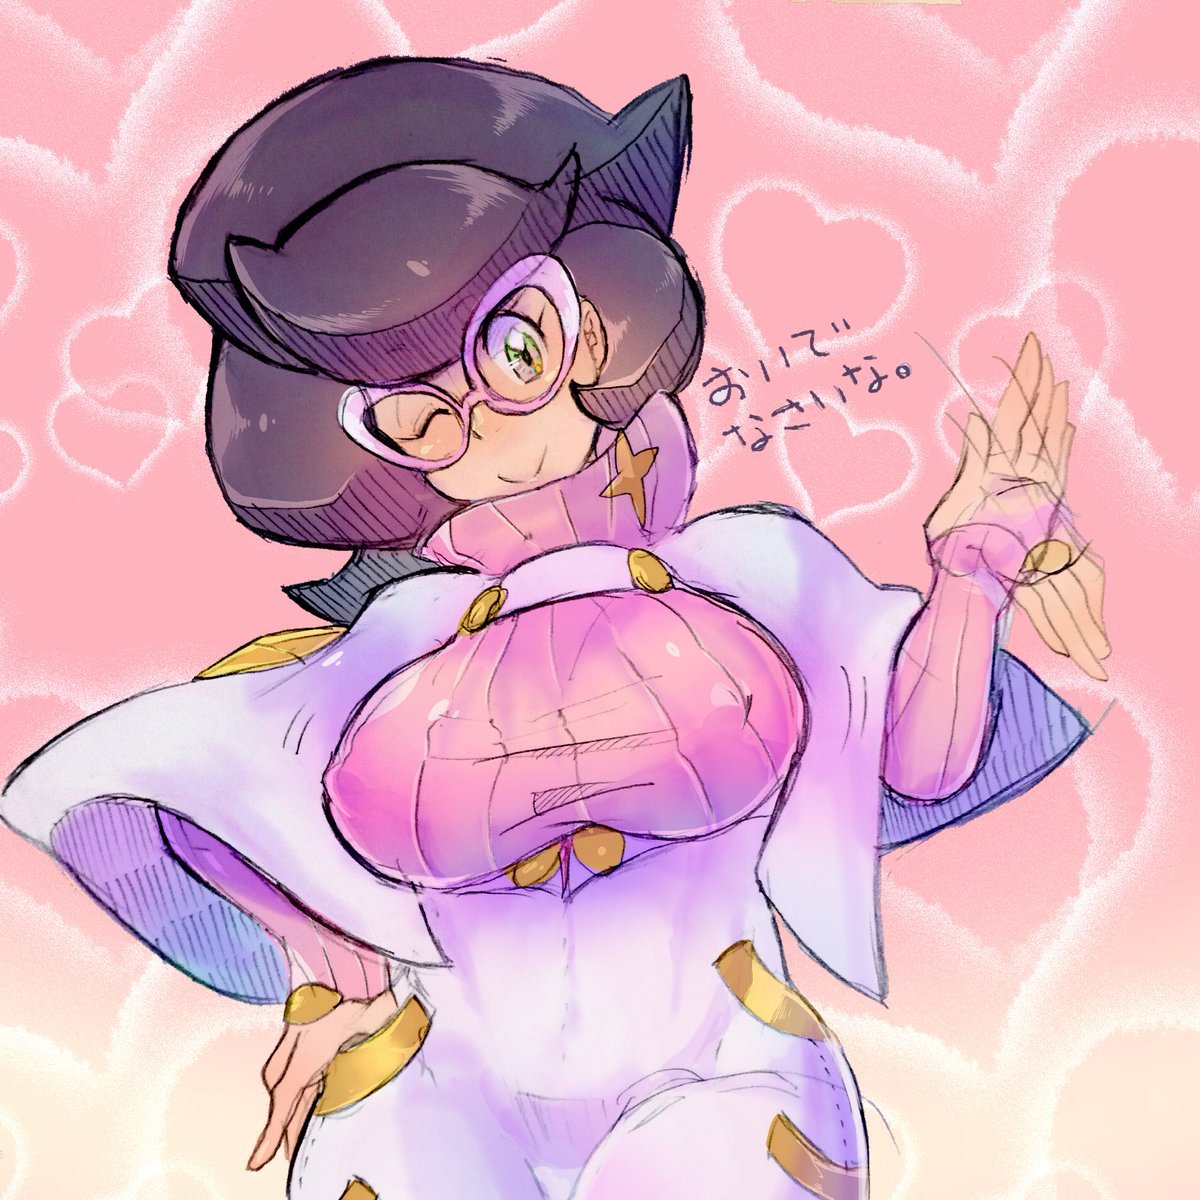 I’M BACK WITH THICKE WICKE ~Chris